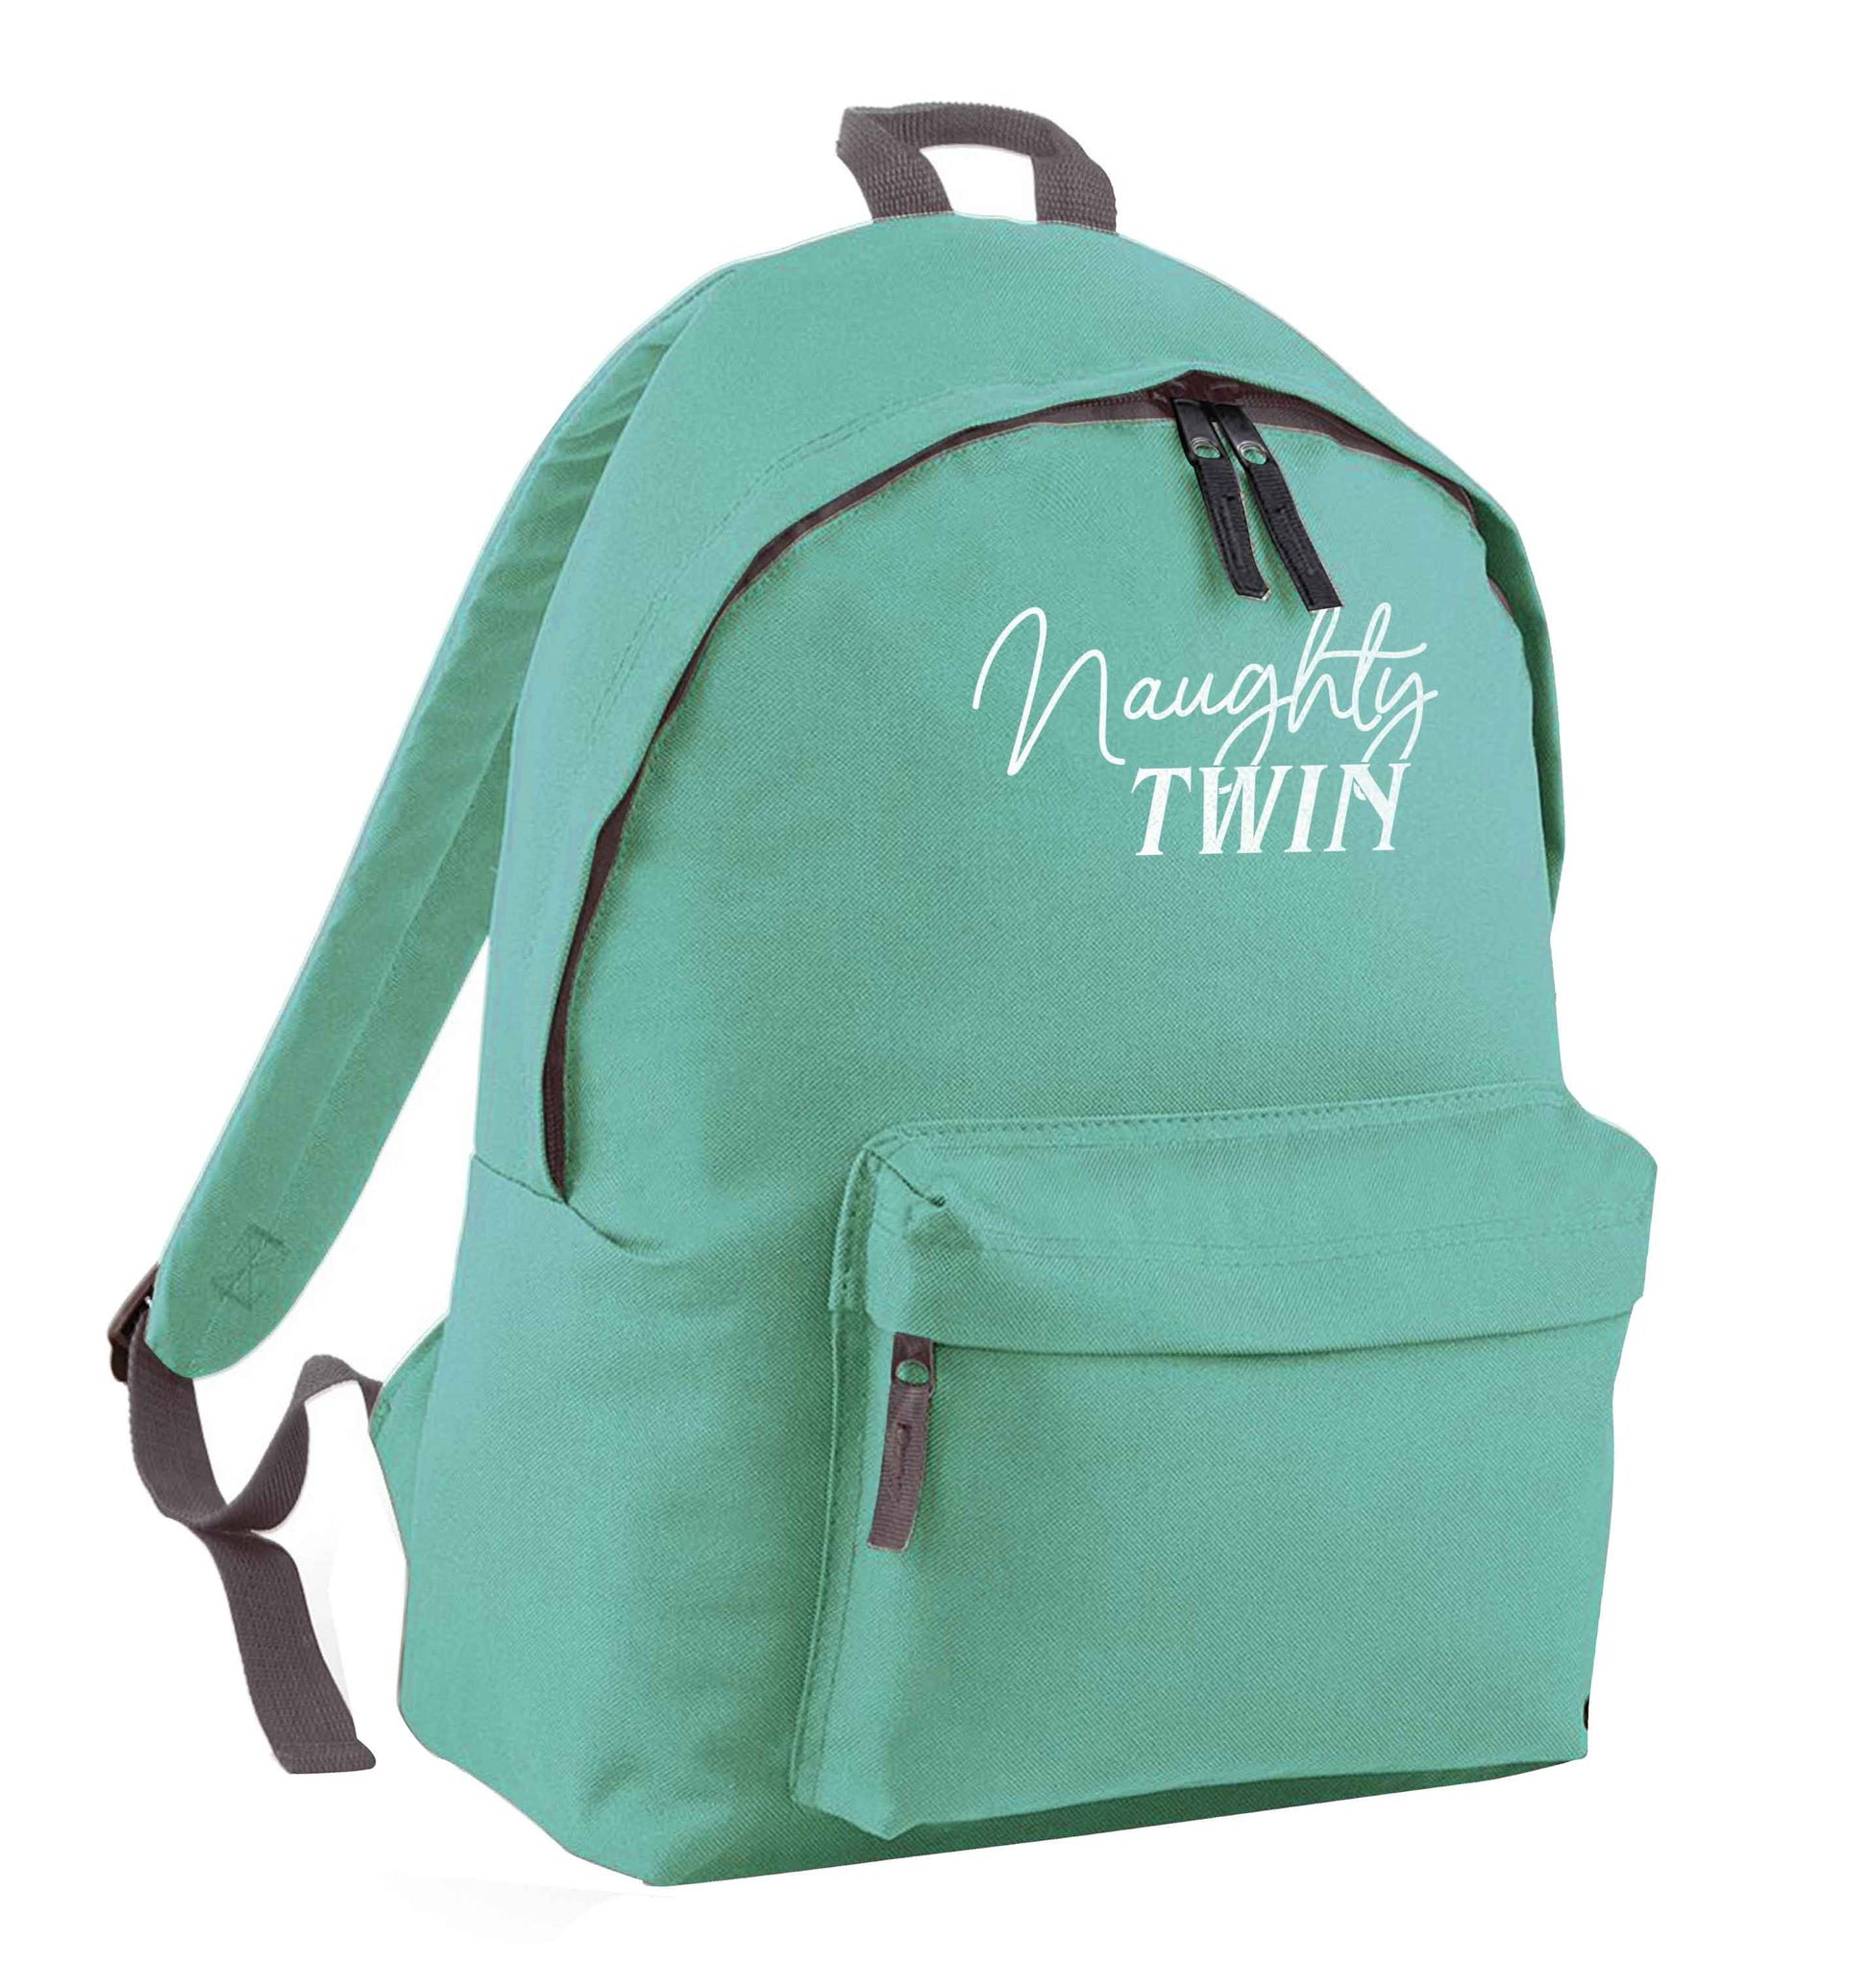 Naughty twin mint adults backpack